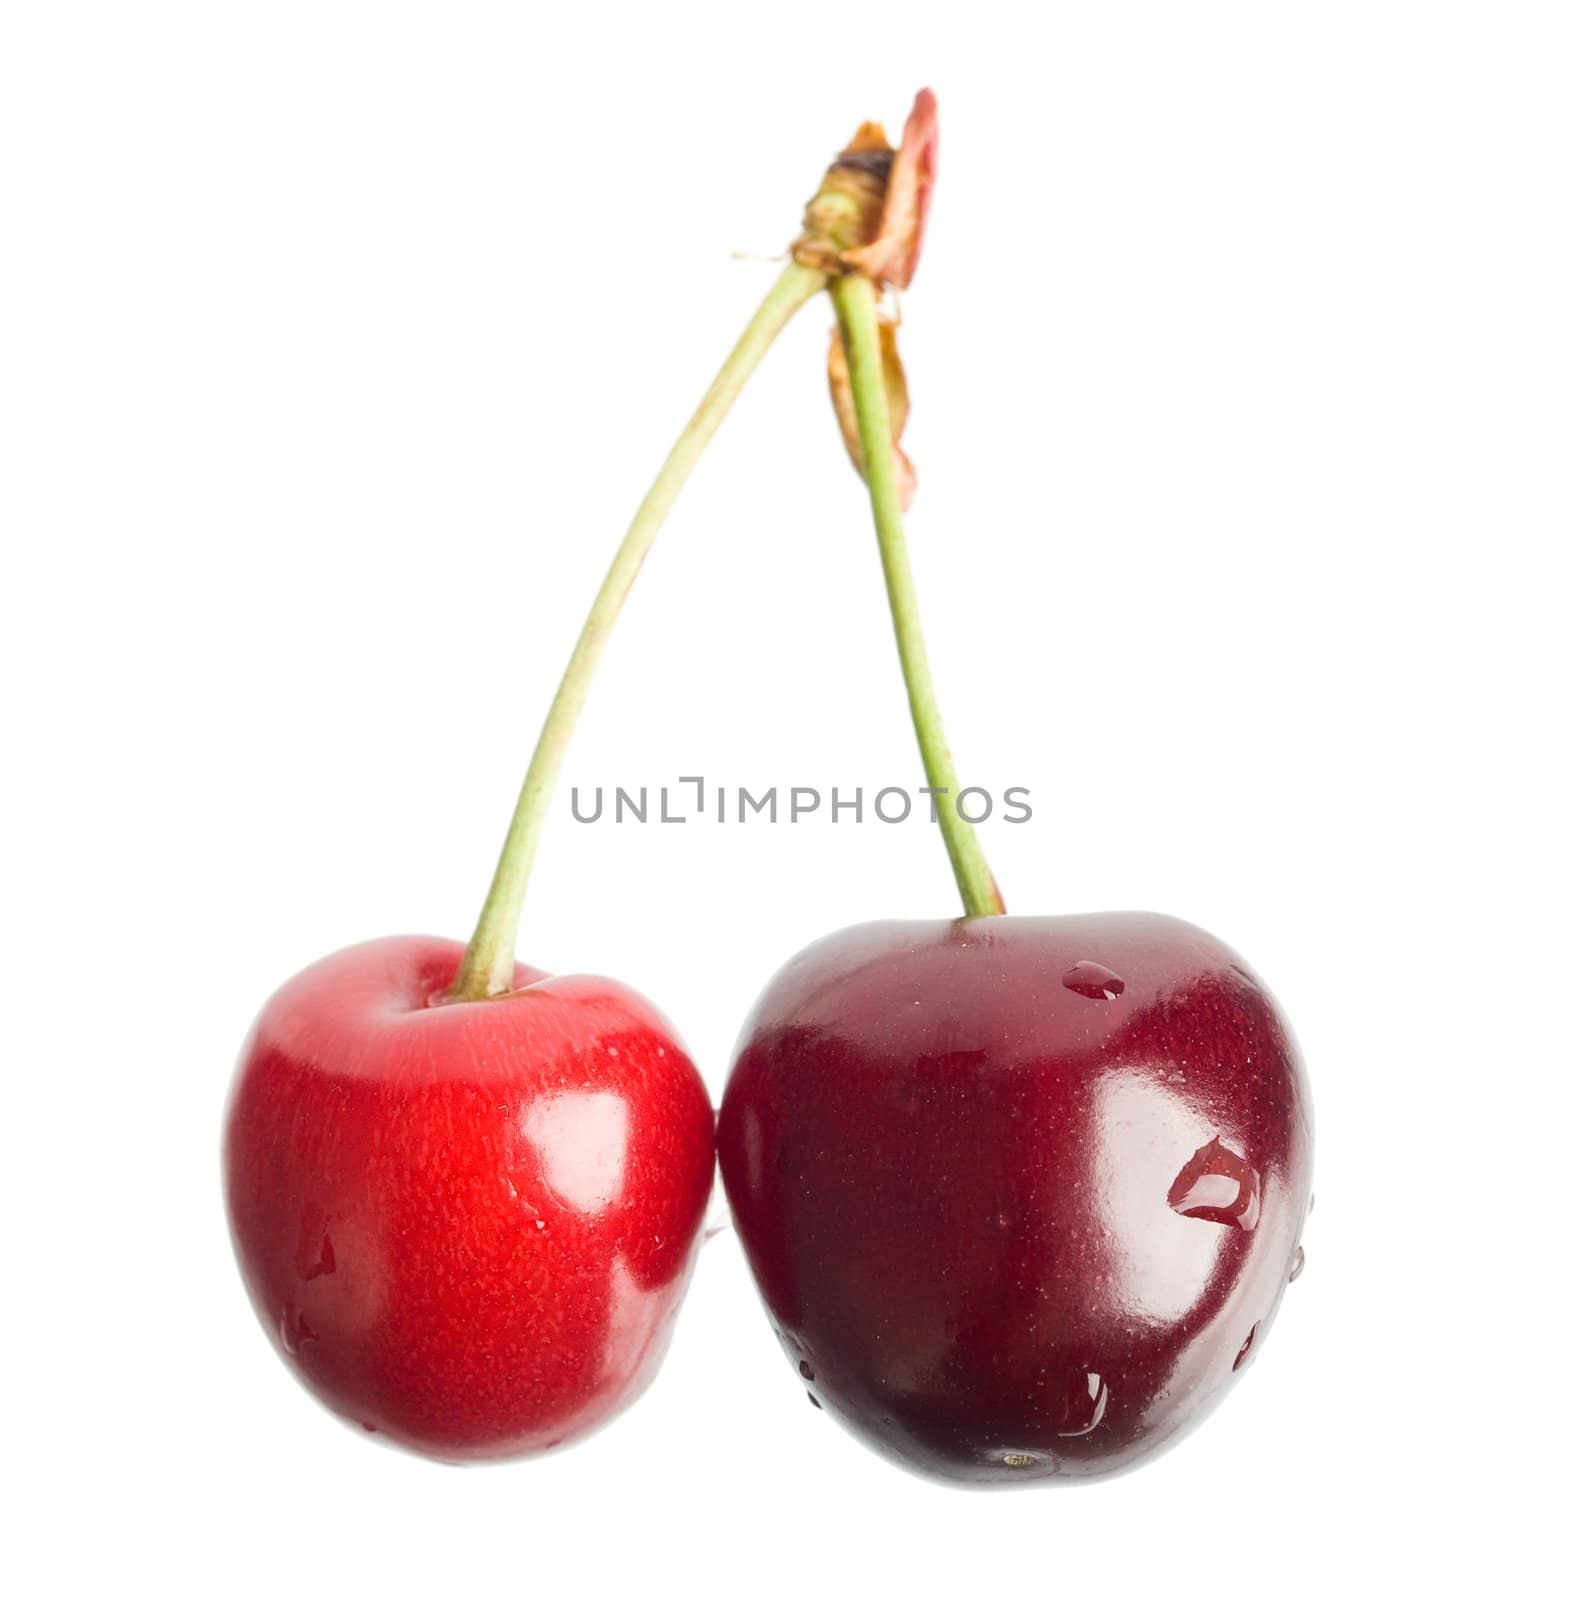 An image of two cherries isolated